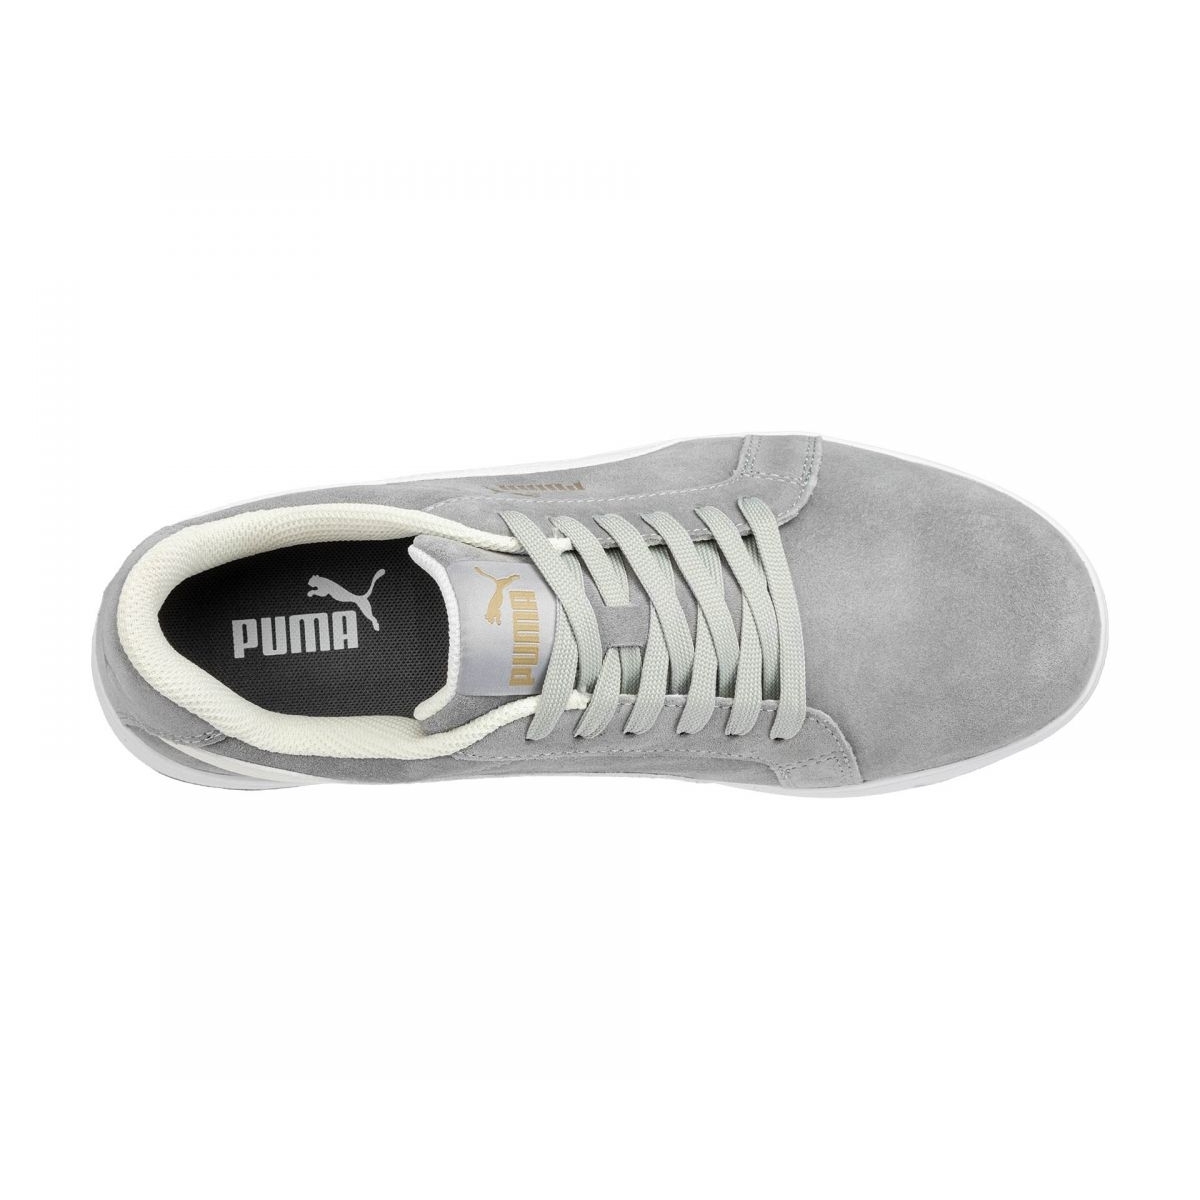 PUMA Safety Men's Iconic Low Composite Toe SD Work Shoes Grey Suede - 640035 Grey - Grey, 9.5